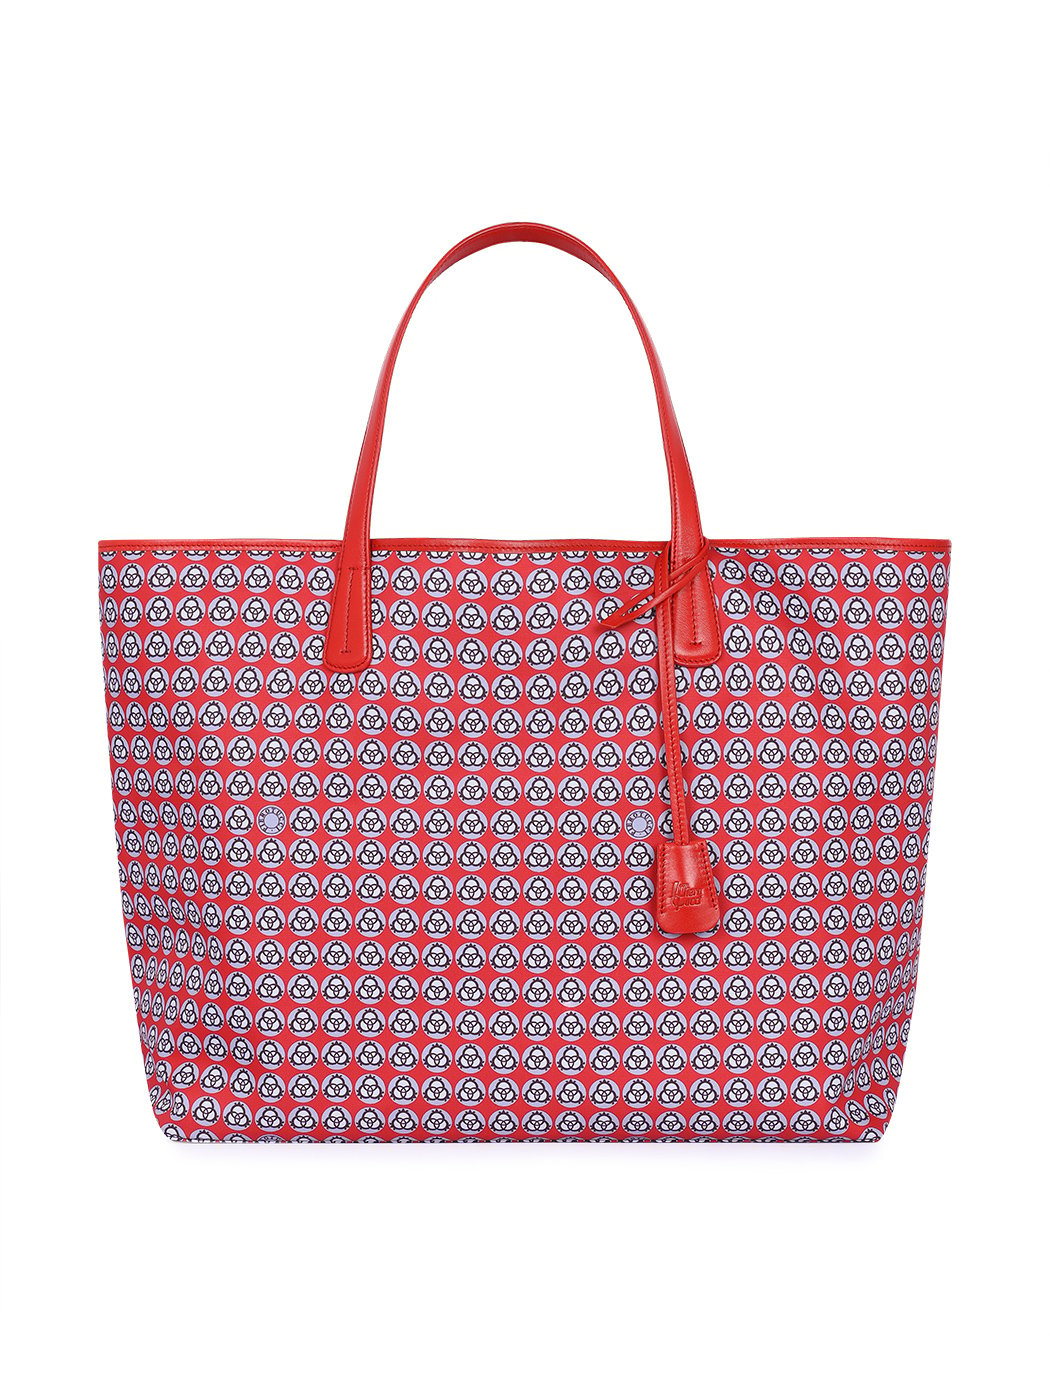 Lightweight Nylon Leather Tote Bag Red